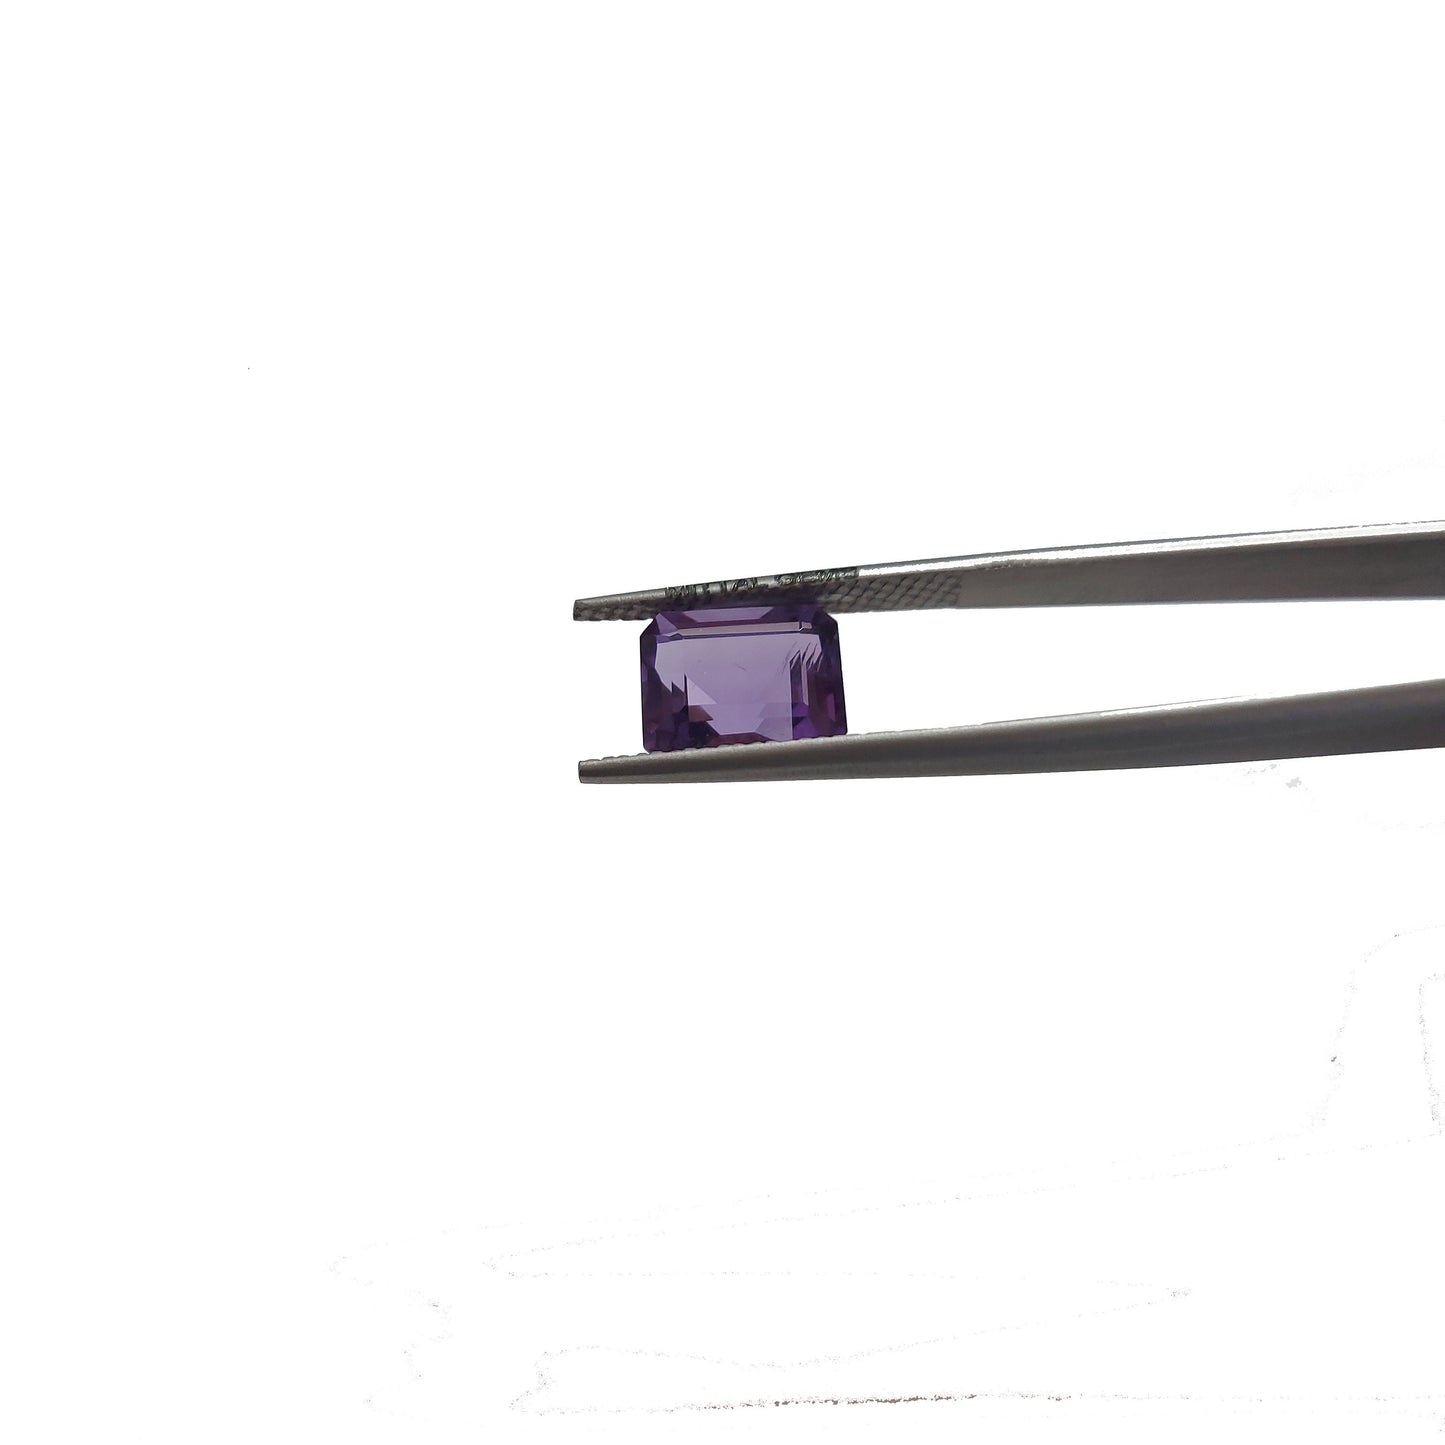 Natural Amethyst Calibrated Octagons | Top Quality